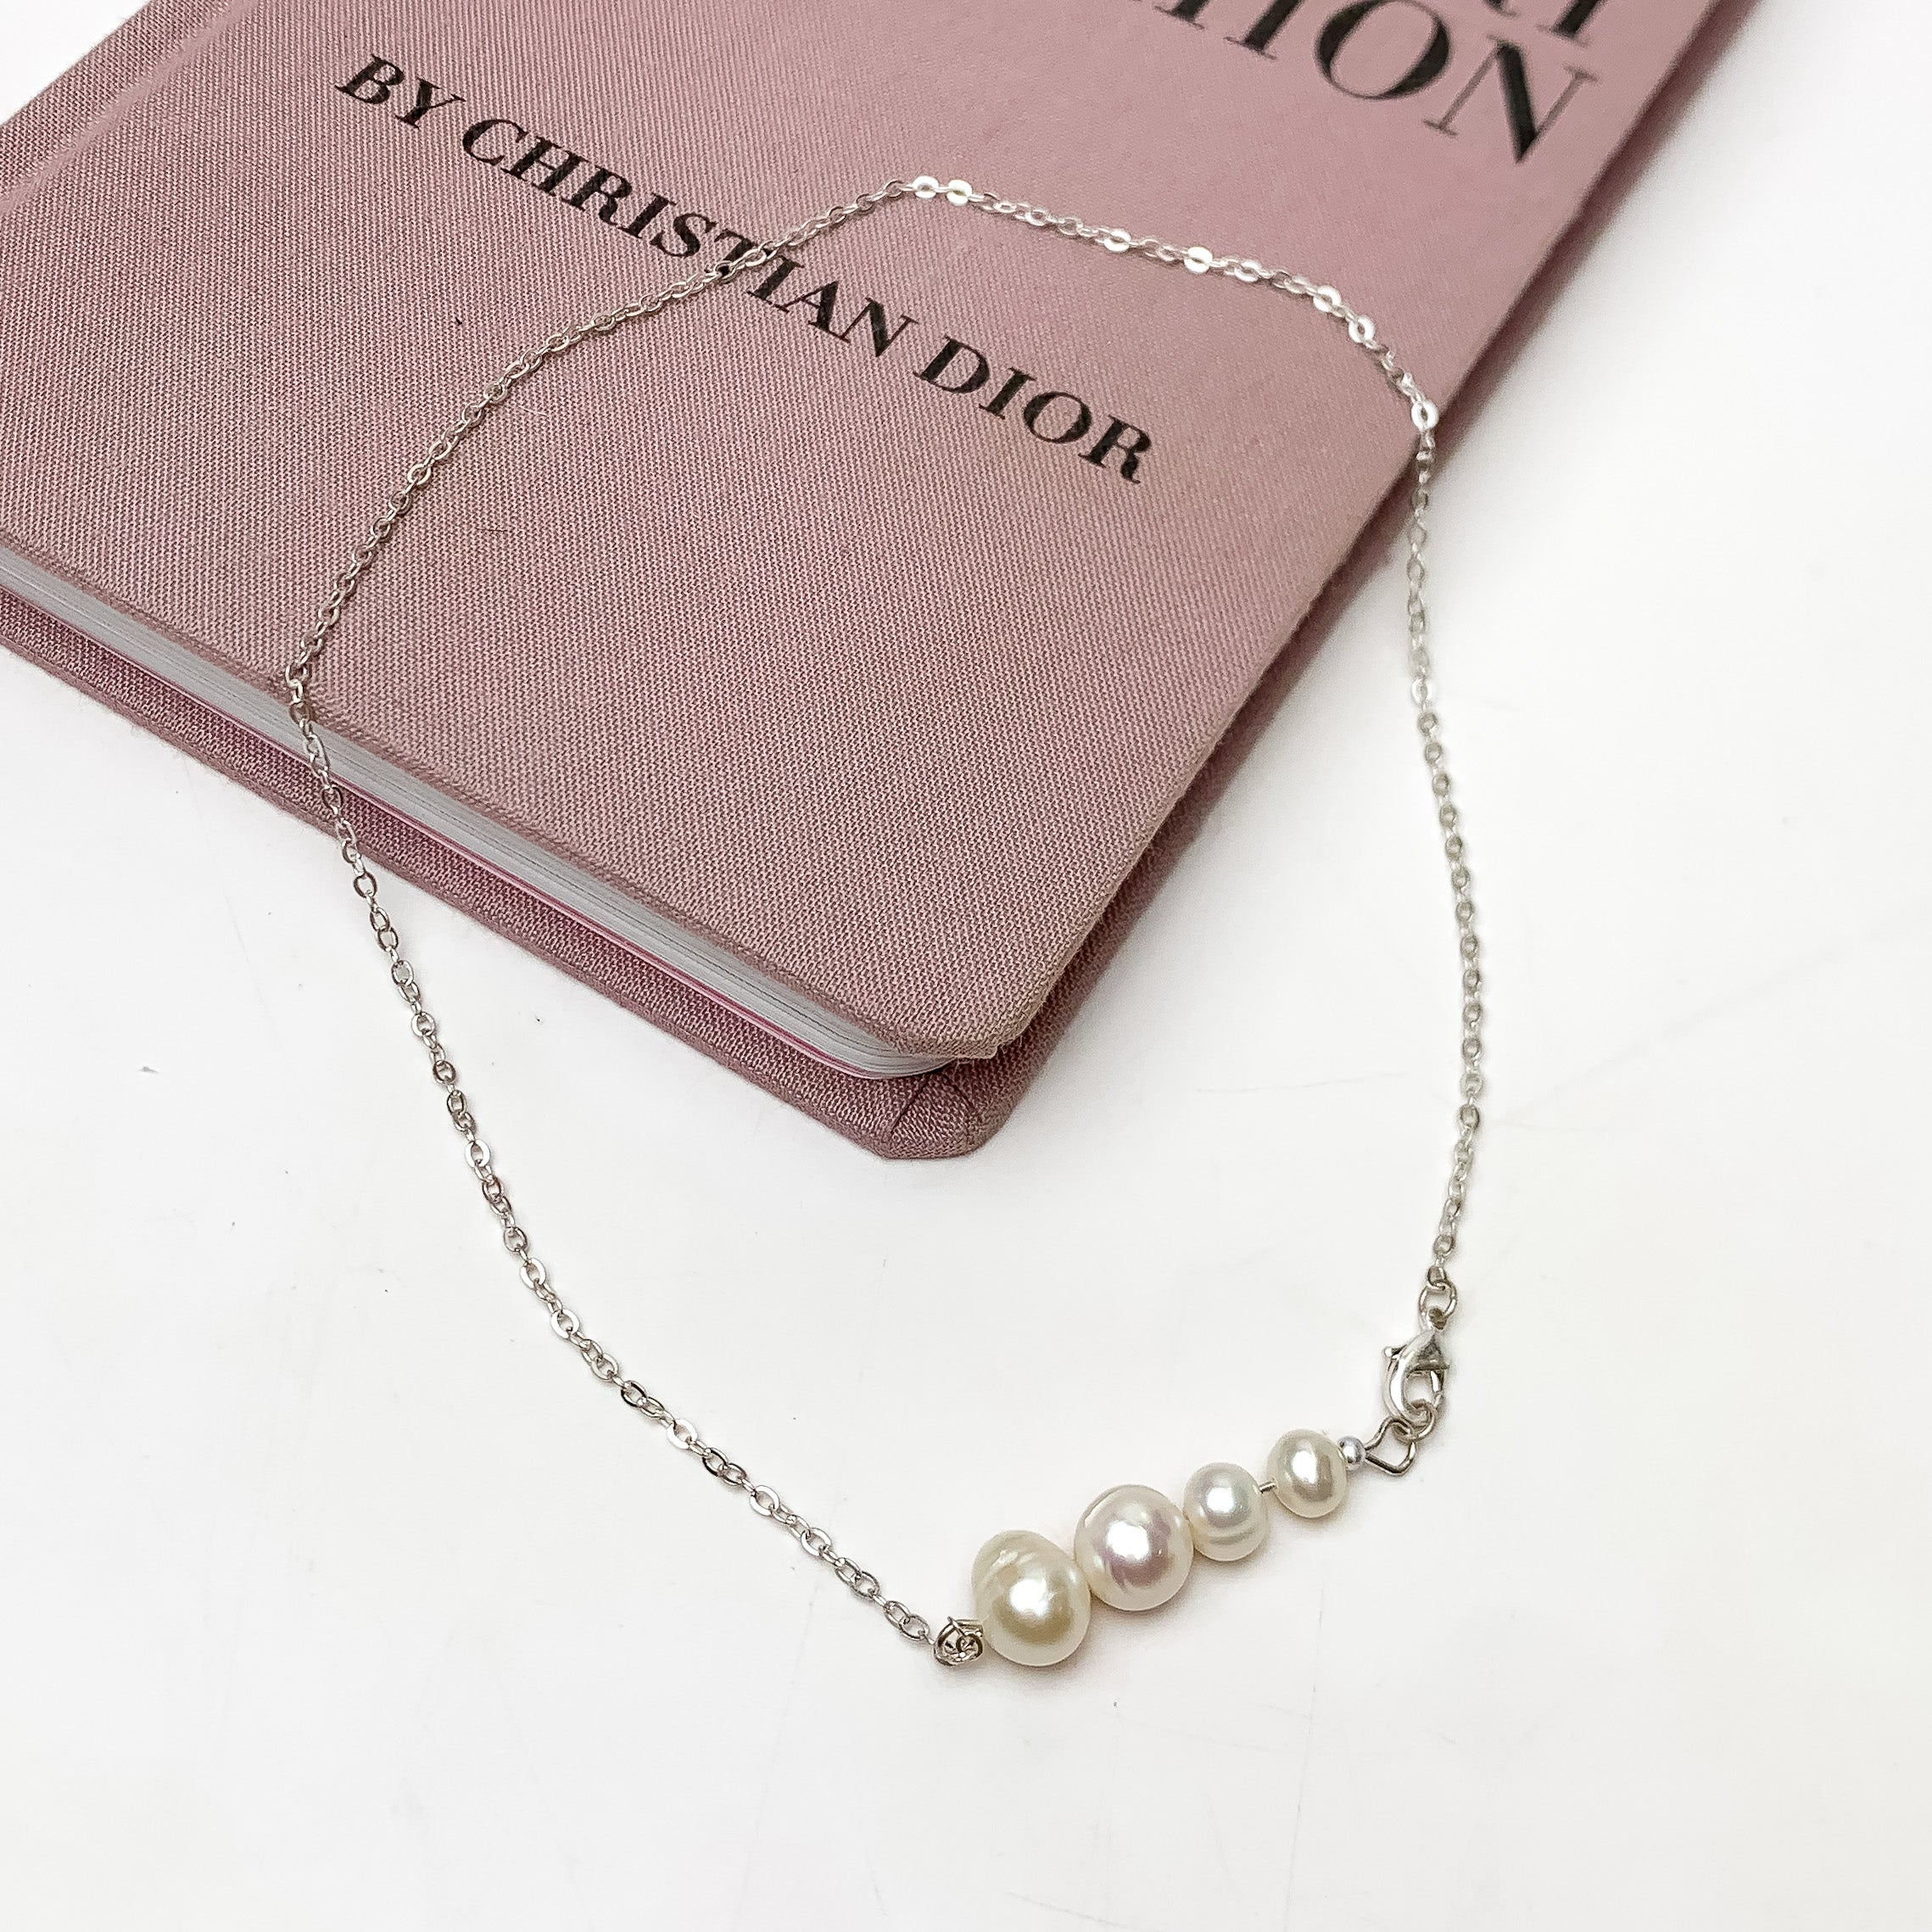 Connecting Pearls Silver Tone Necklace. This necklace is pictured on a white background with part of it on a pink book.